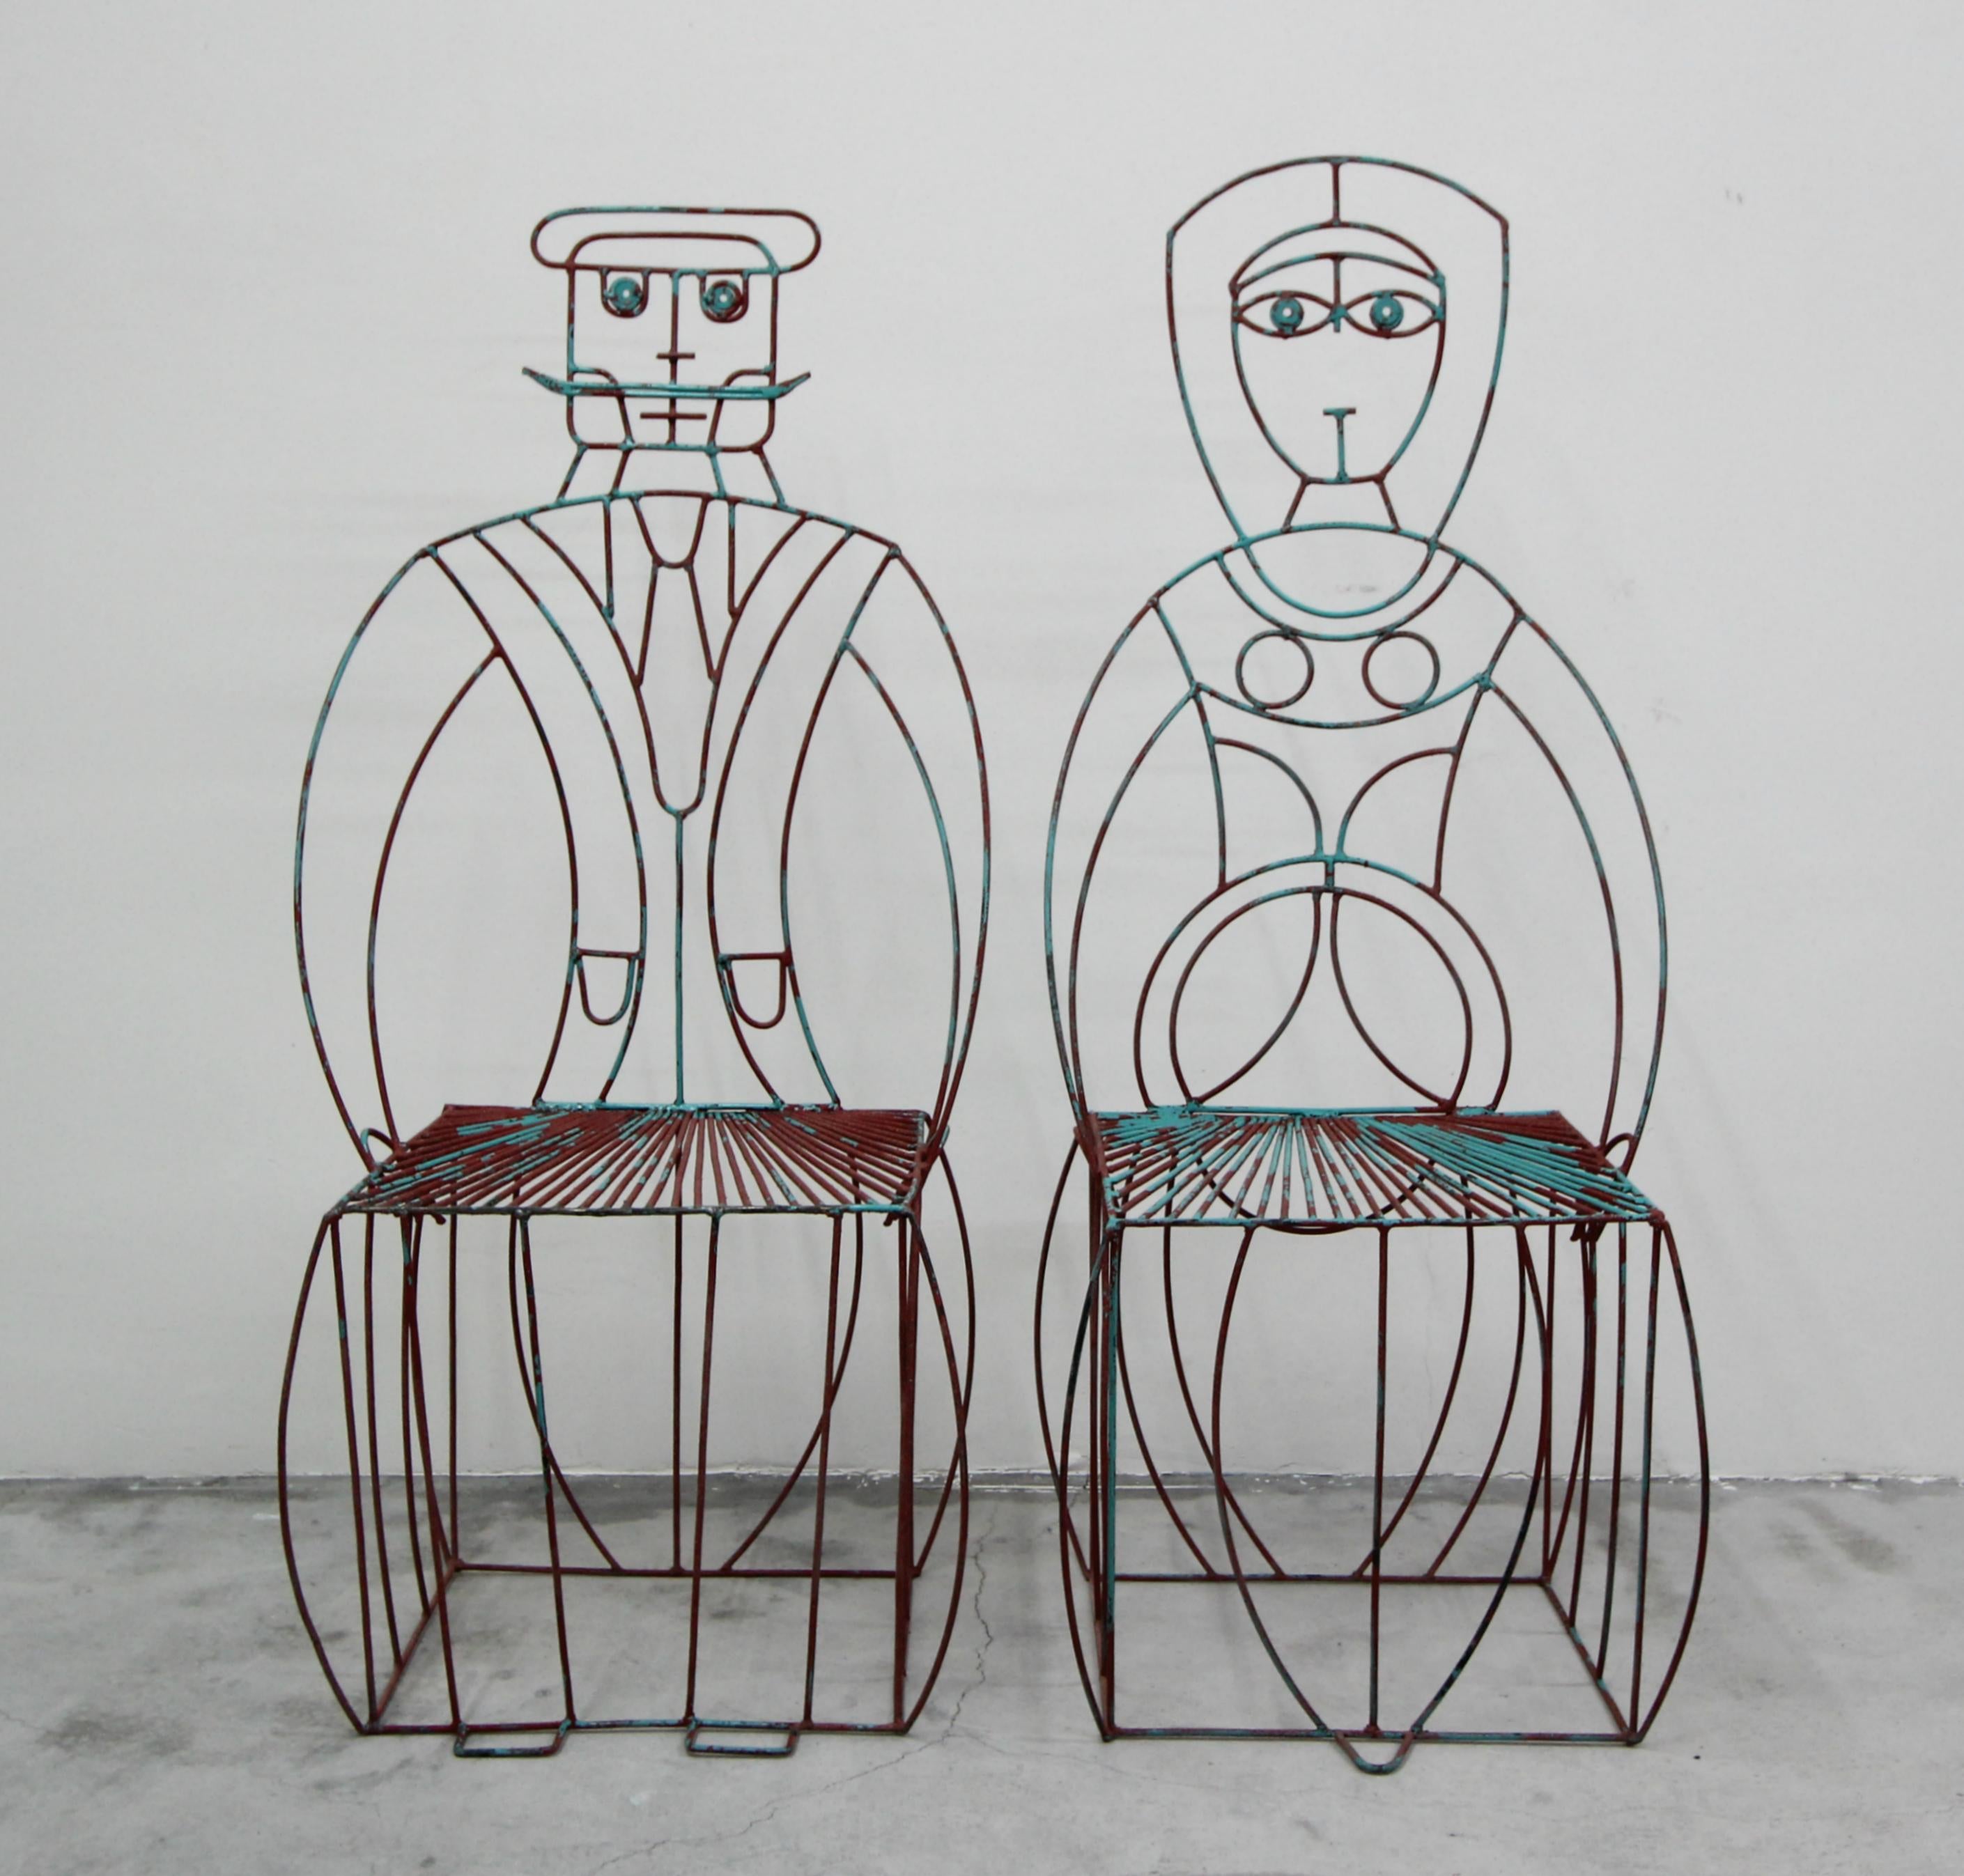 A pair of classic, figural his and hers wire chairs by John Risley. I love the concept of functional art and these whimsical chairs are no exception.

The chairs have been painted a couple times over the years and that paint is chipping off